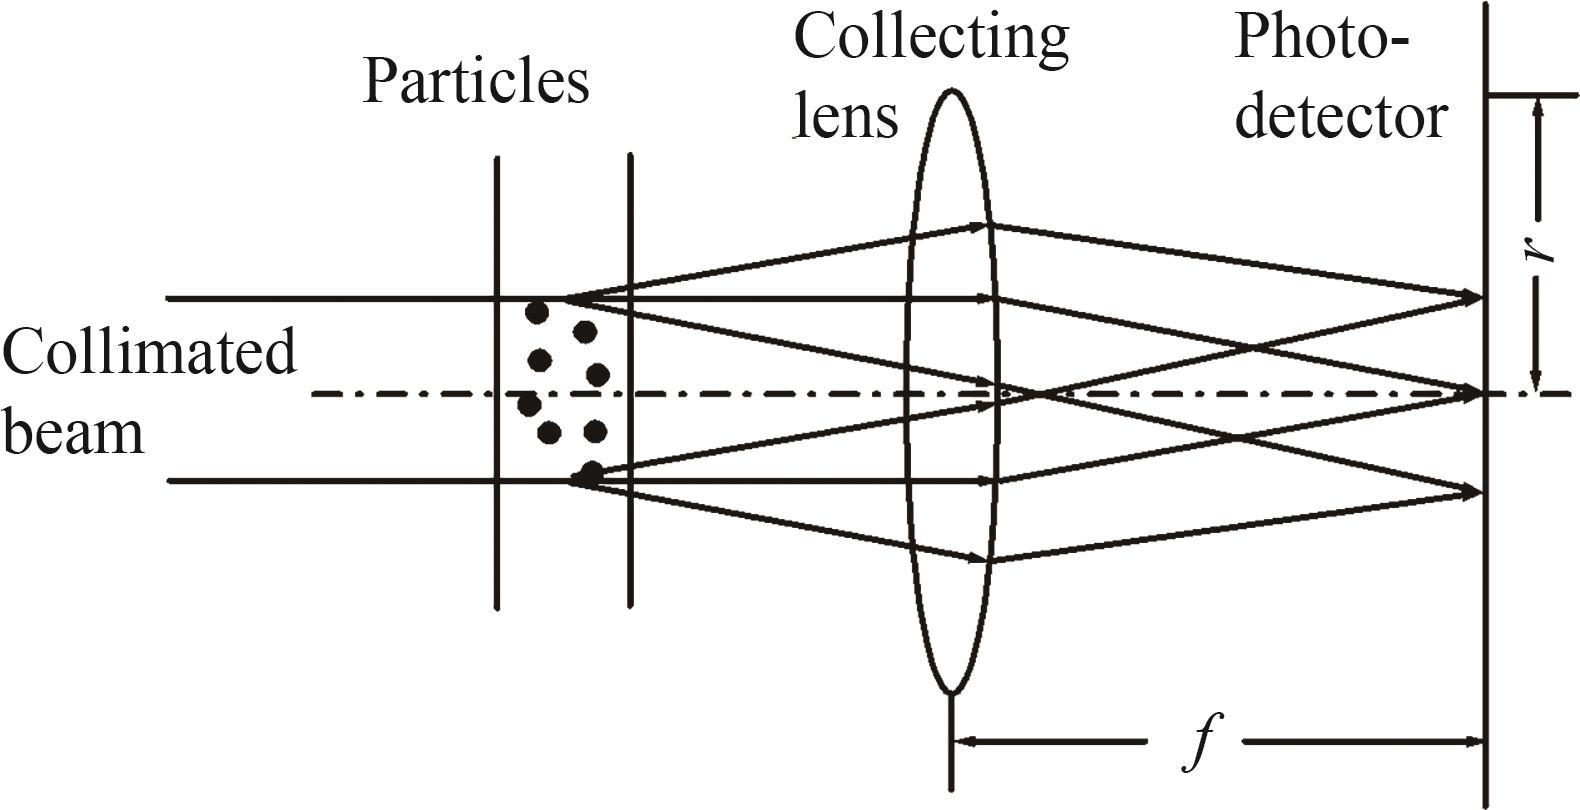 Schematic of particle size measurement based on forward light scattering